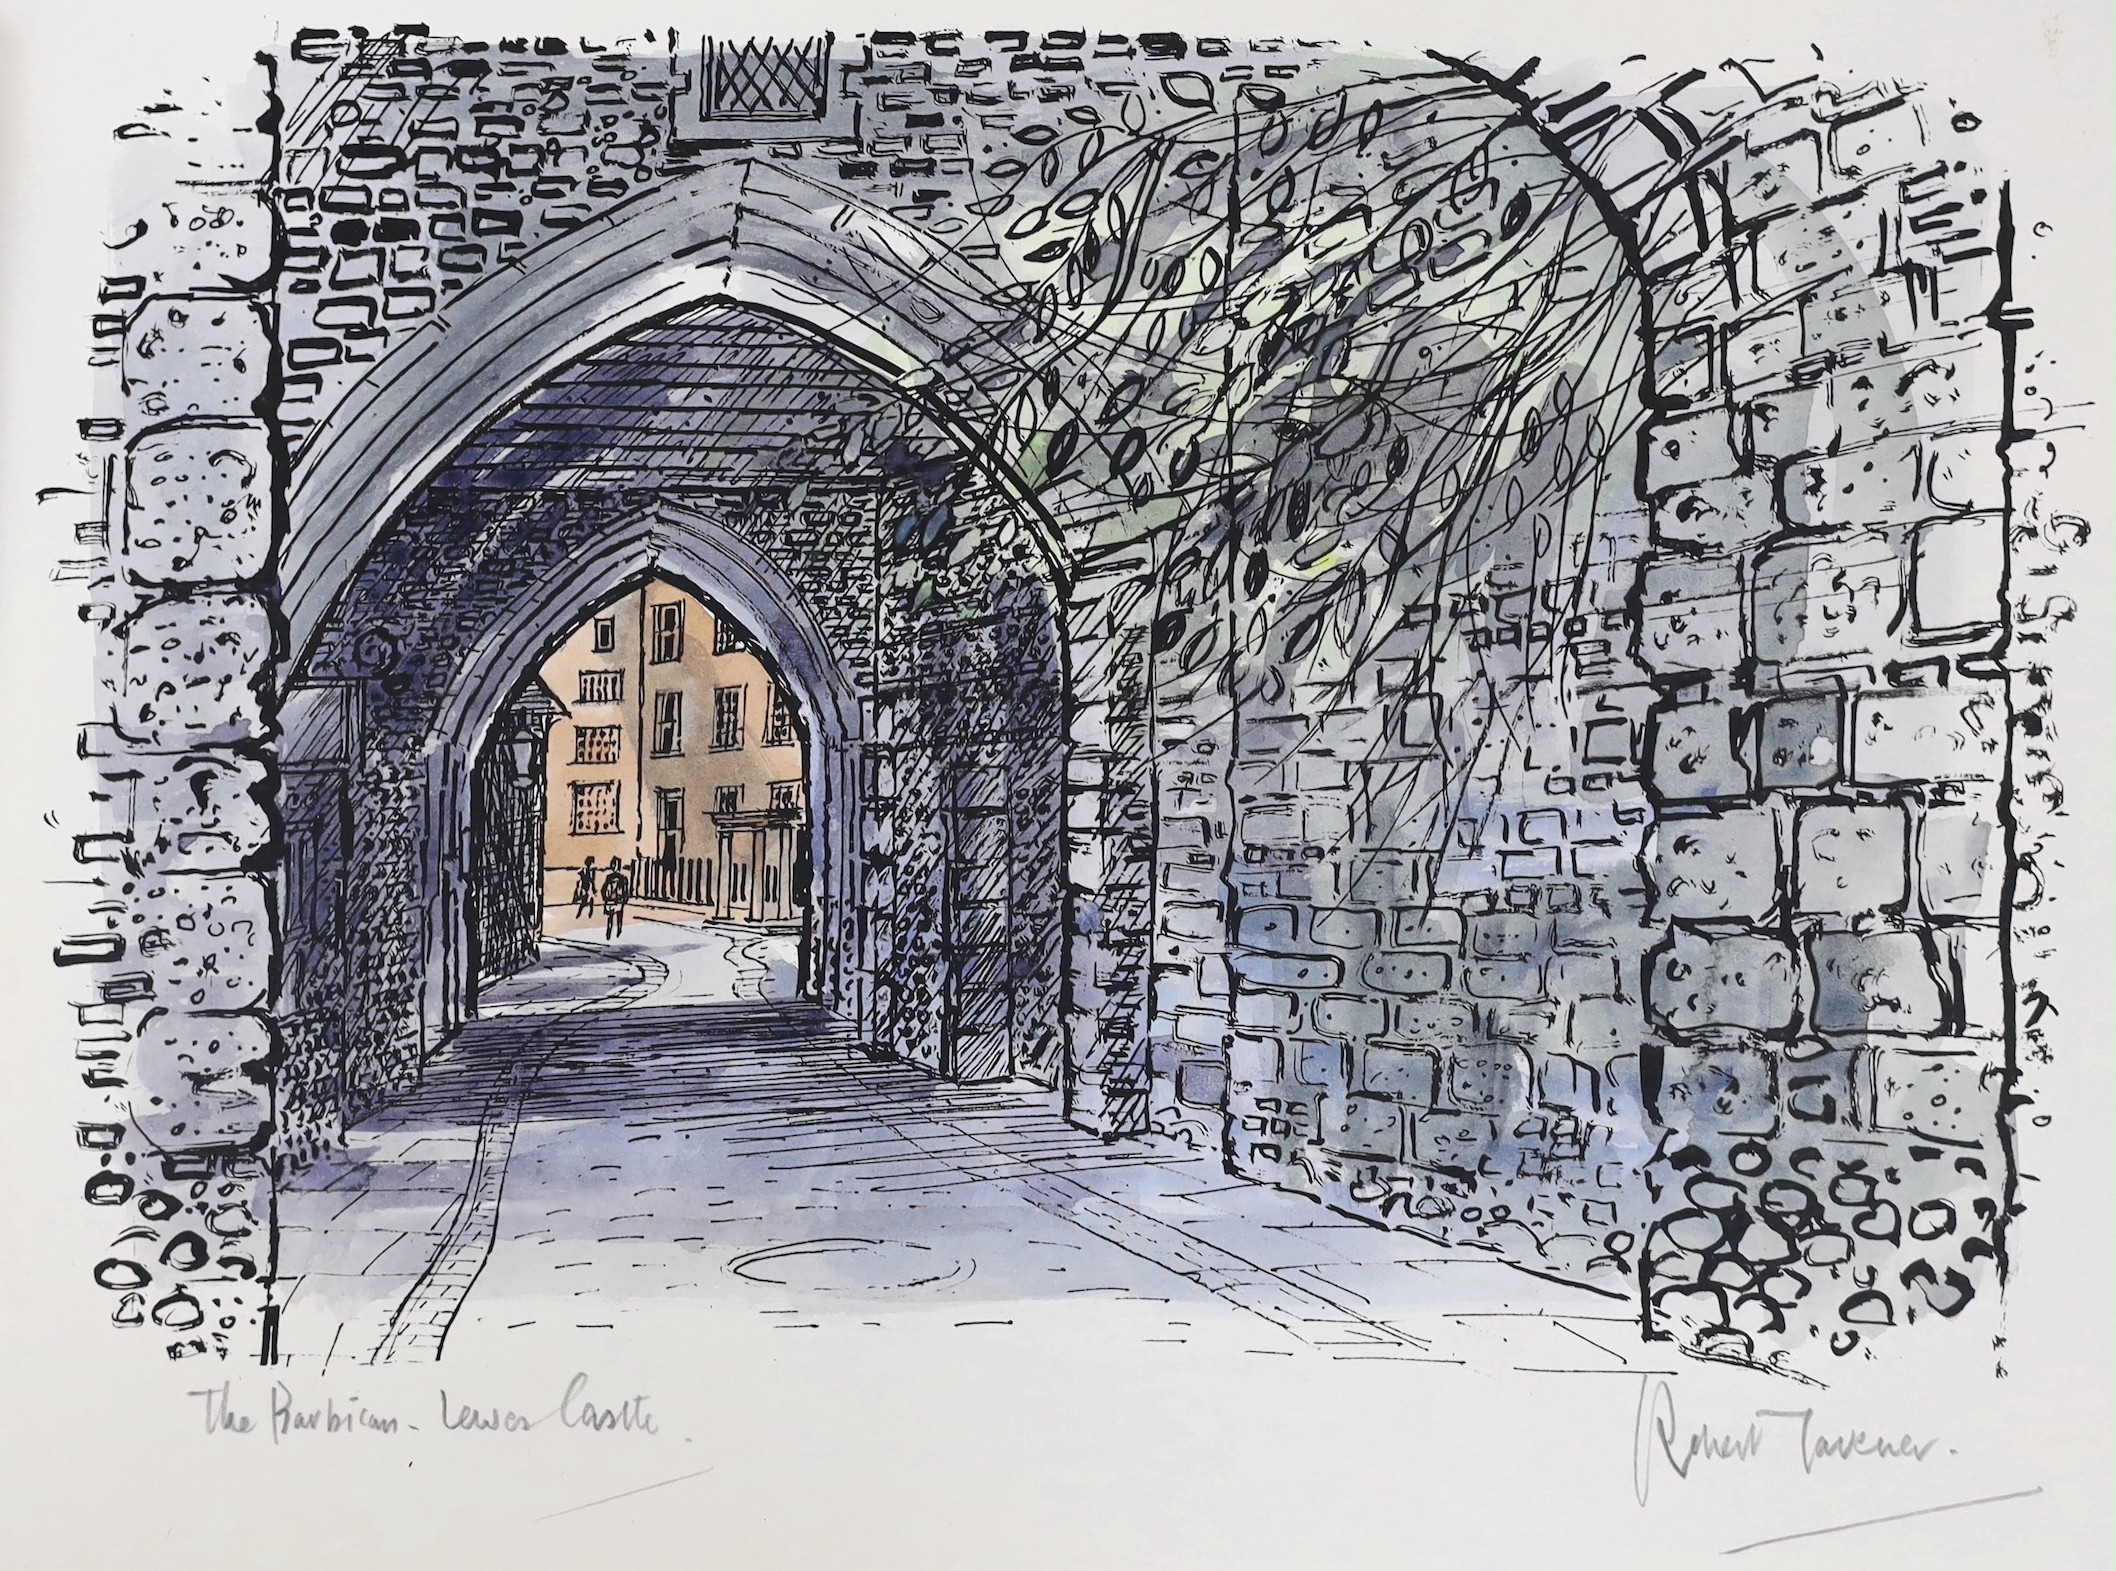 Robert Tavener (1920-2004), three hand coloured prints, 'The Barbican, Lewes Castle', 'St. Mary's, Friston, Sussex' and Downland scene, all signed and inscribed in pencil, 21 x 30cm (2) and 14 x 20cm